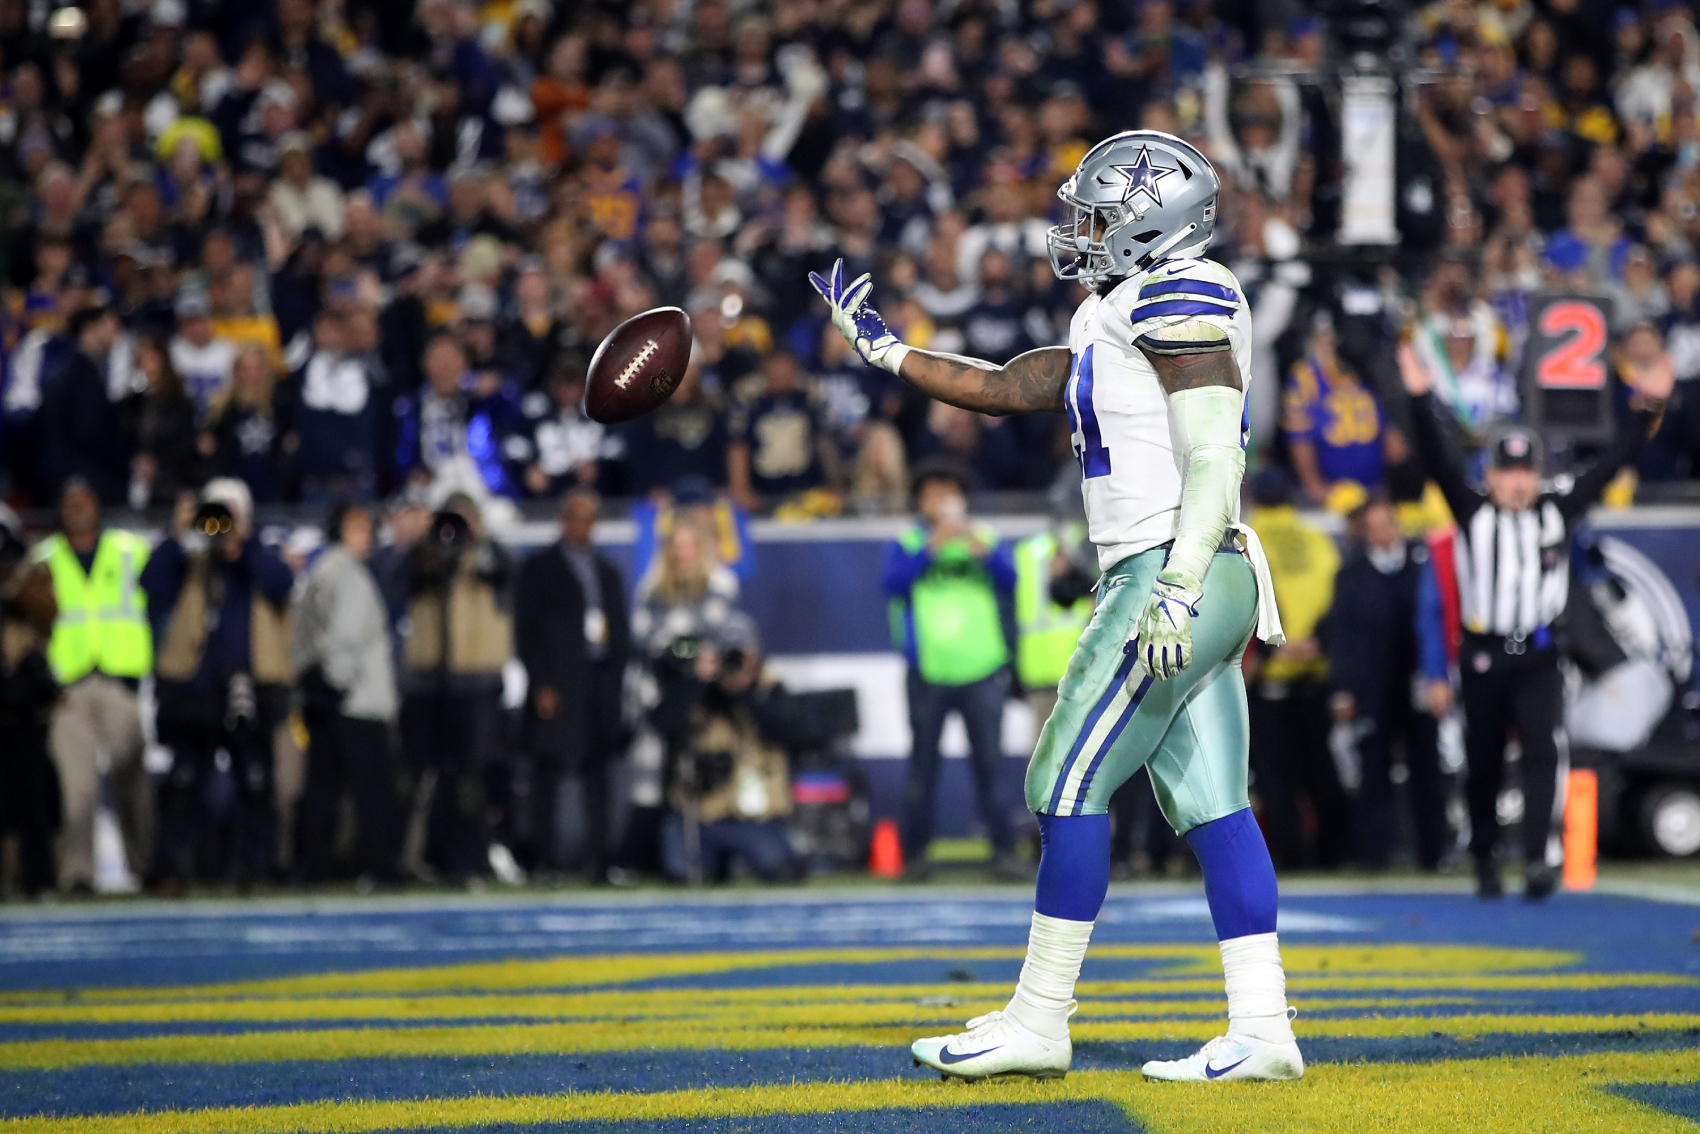 Ezekiel Elliott has had a great start to his career with the Dallas Cowboys. He is even in an exclusive club with LaDainian Tomlinson.